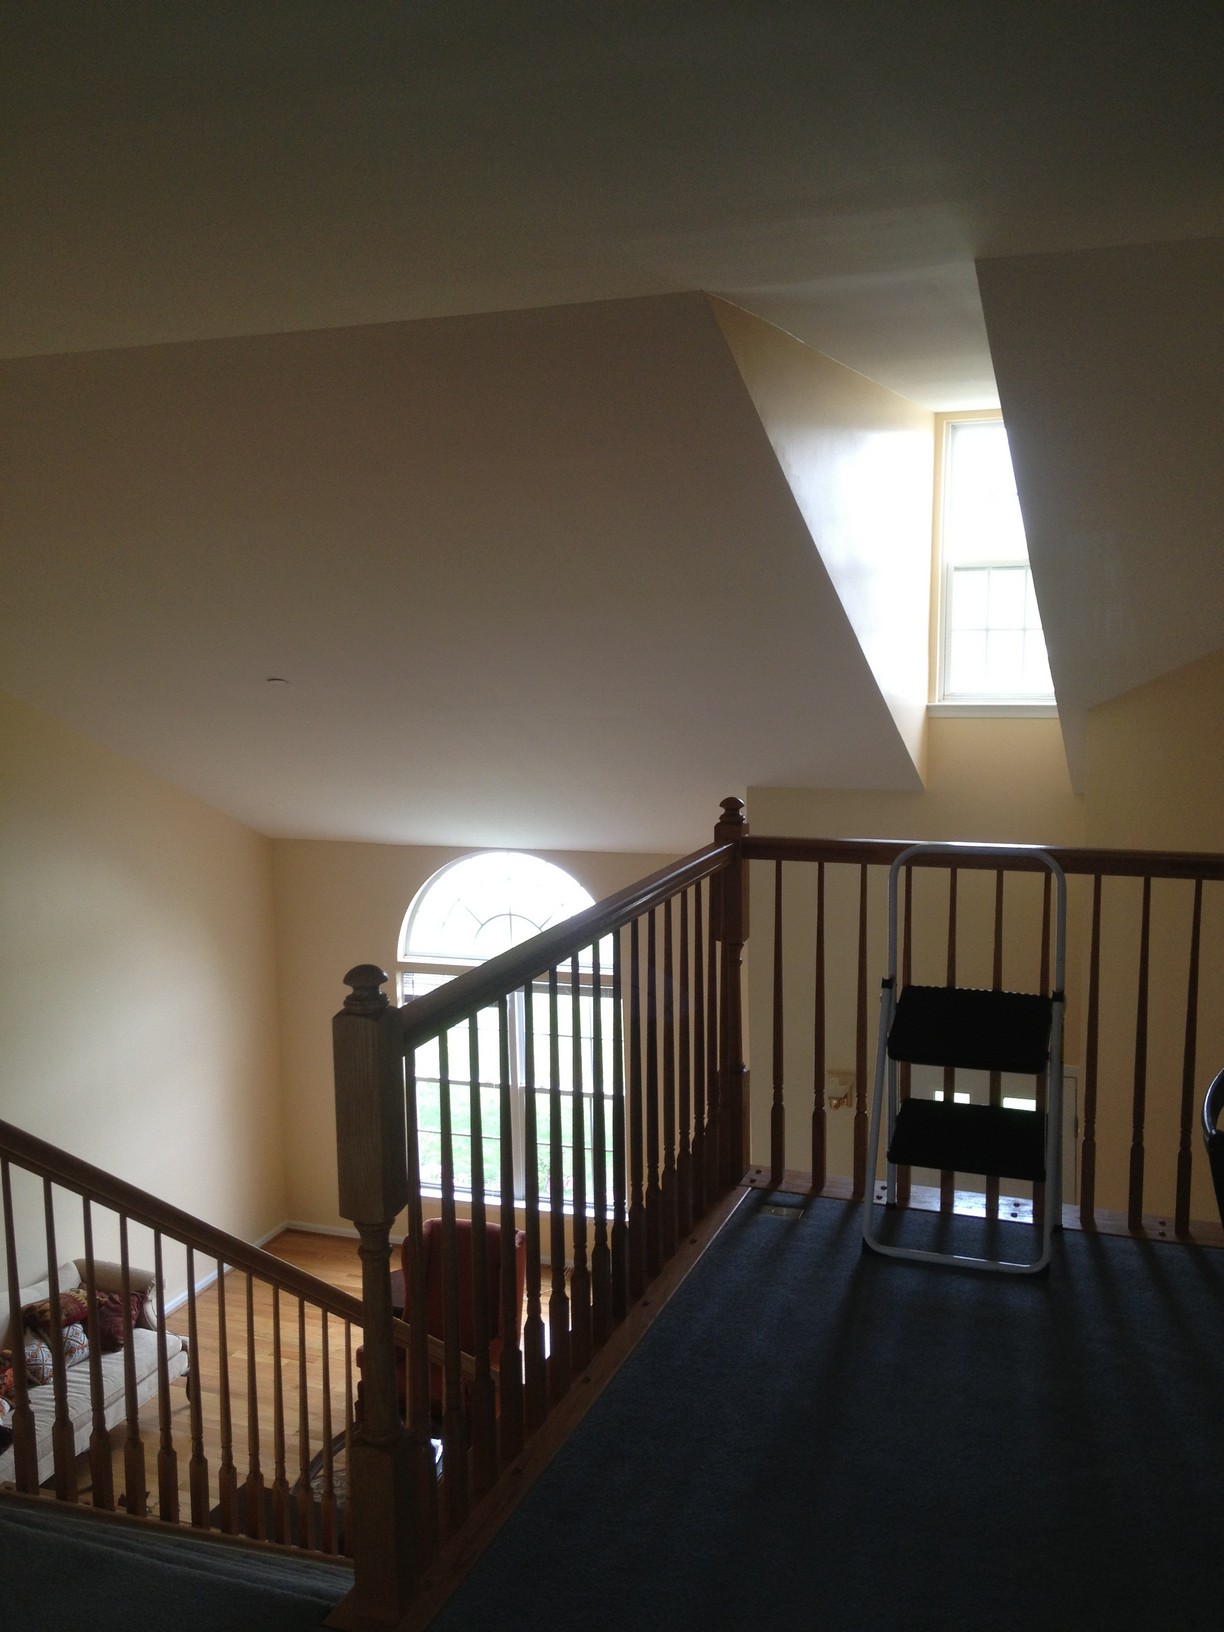 Interior painting services at Paramount Painters in Pennsylvania and Maryland